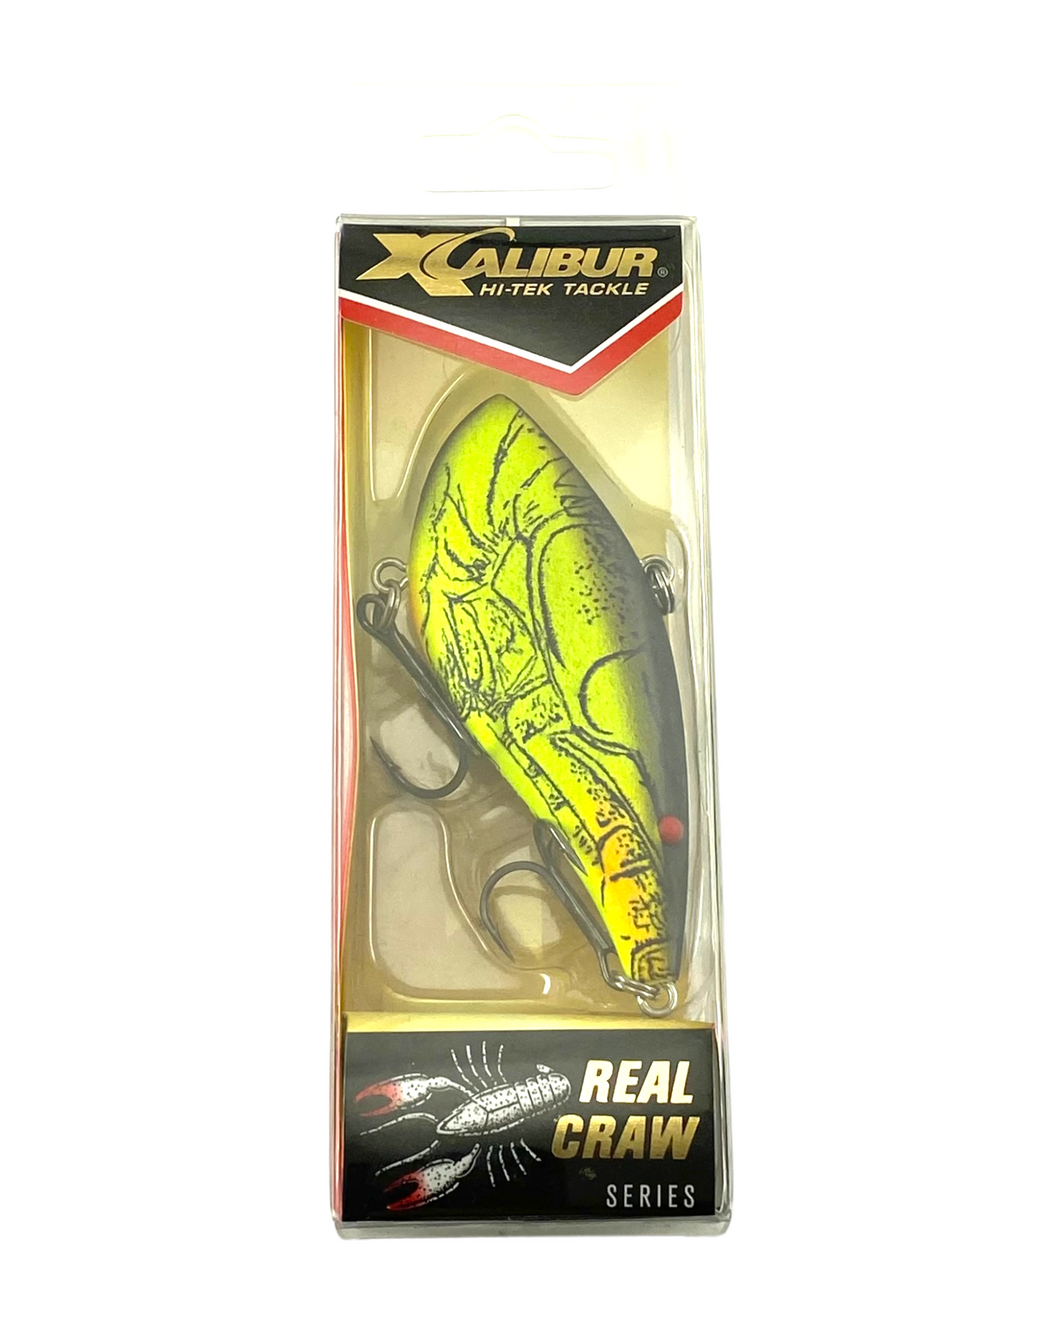 REAL CRAYFISH SERIES • XCALIBUR XR50 Fishing Lure in MOSS BACK CRAW